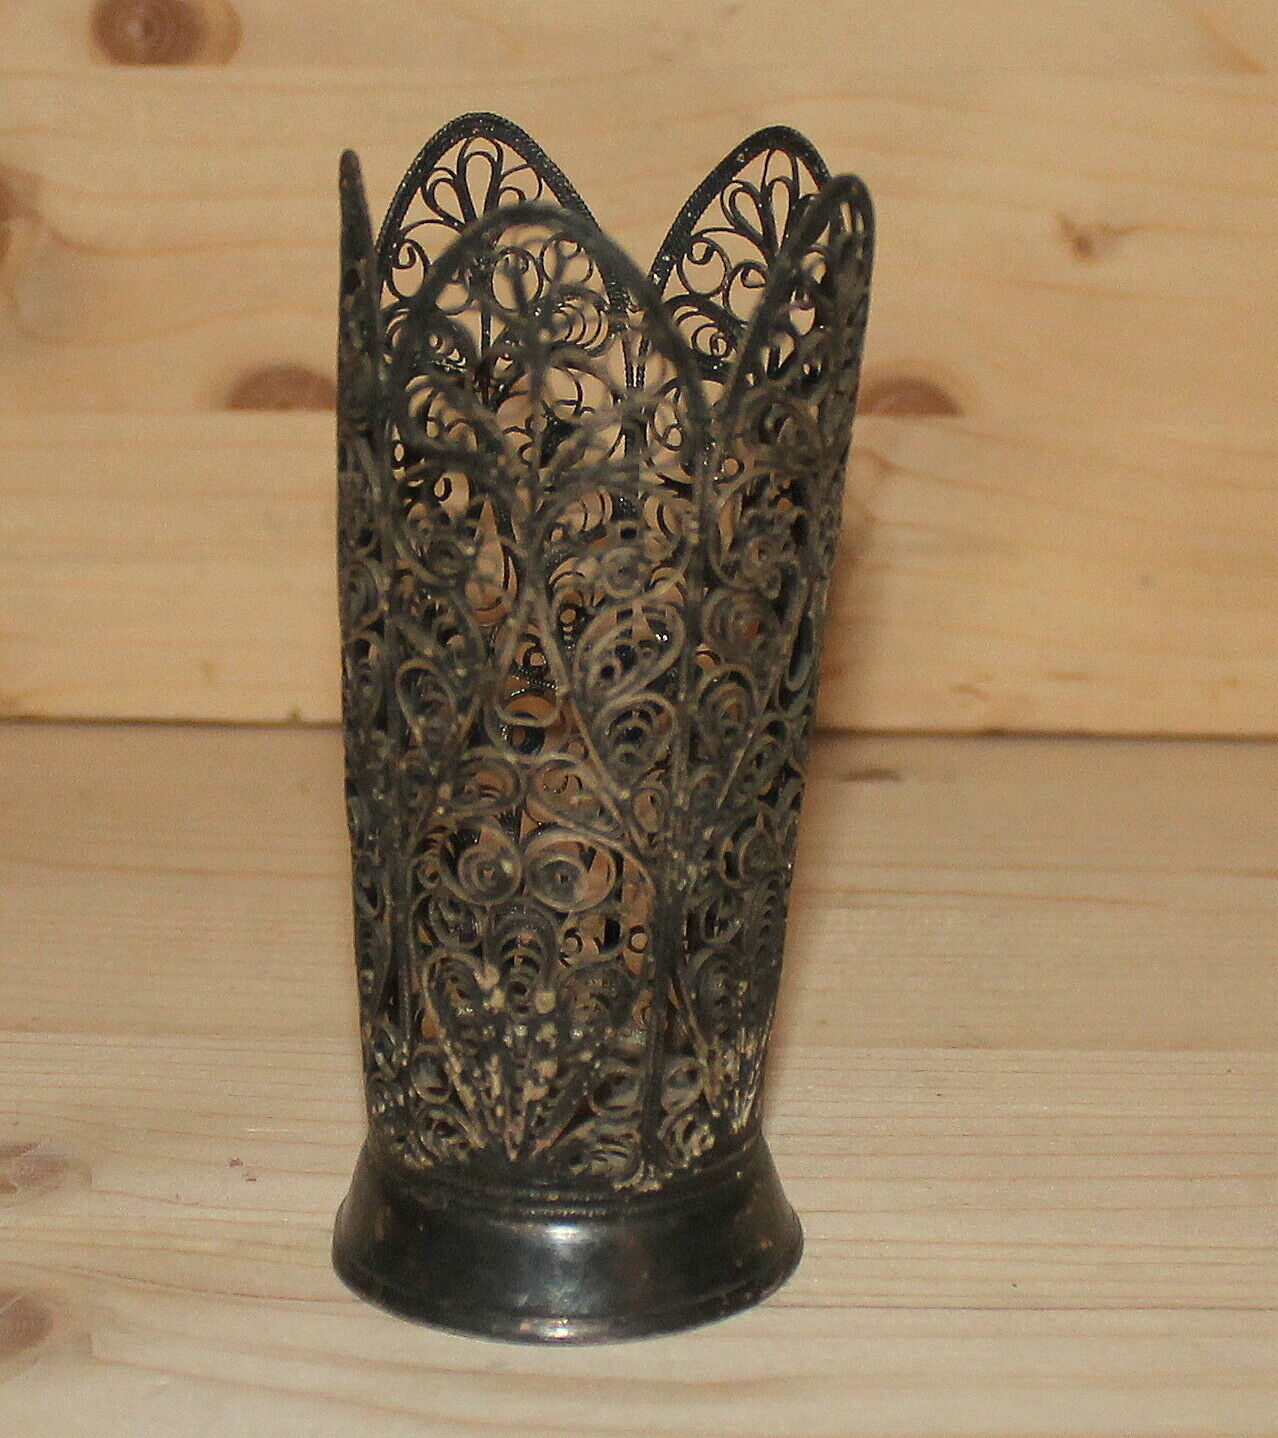 Antique Russian Art Nouveau Hand Made Silver Plated Filigree Floral Vase